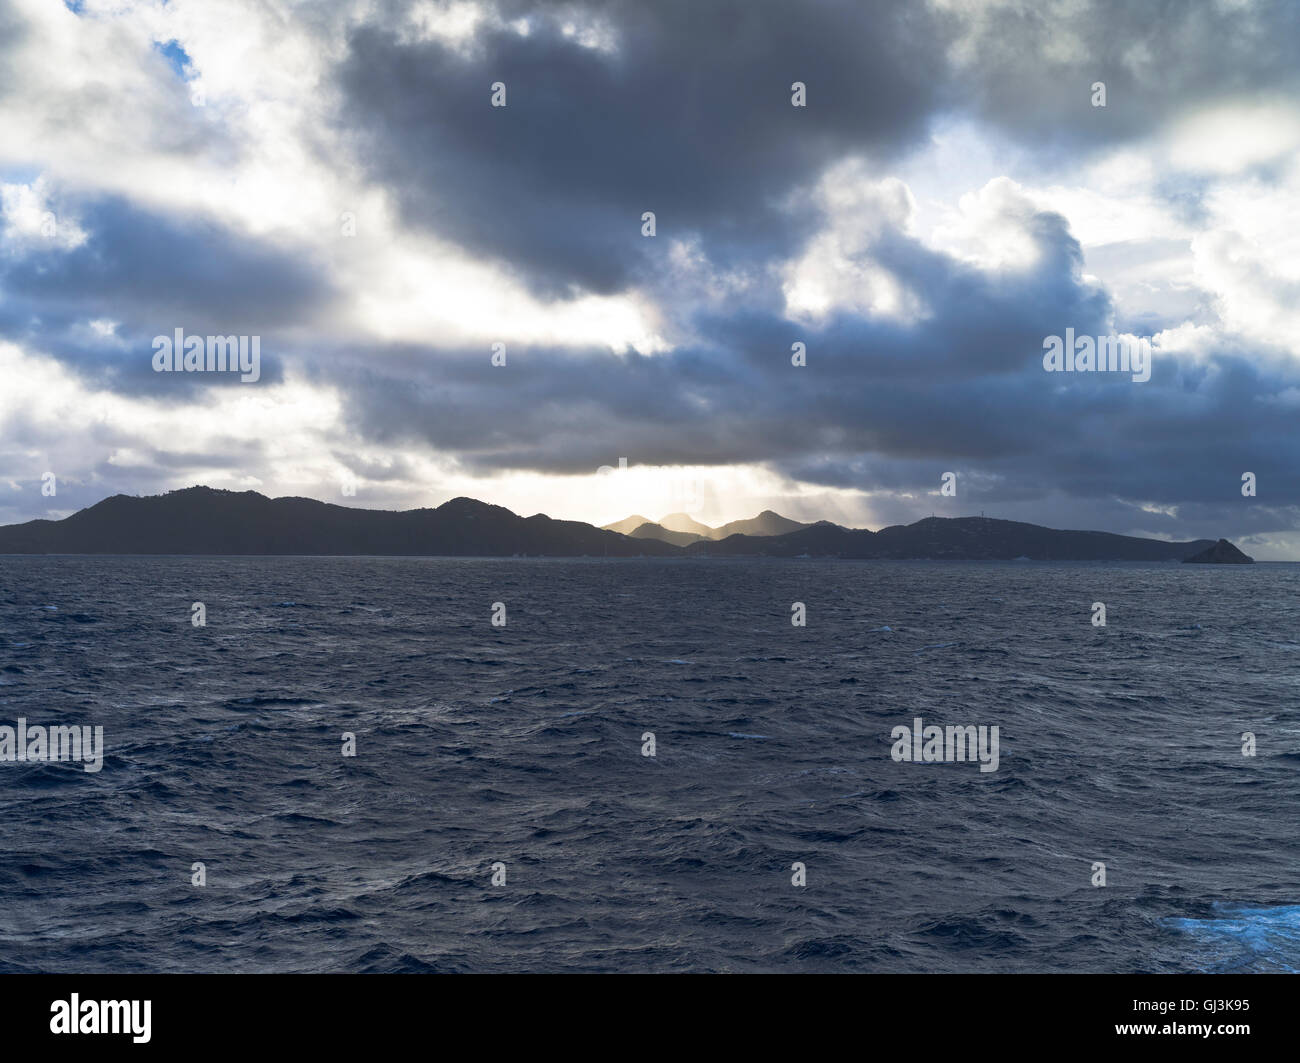 dh  ST BARTHELEMY CARIBBEAN Storm clouds over Caribbean island Stock Photo